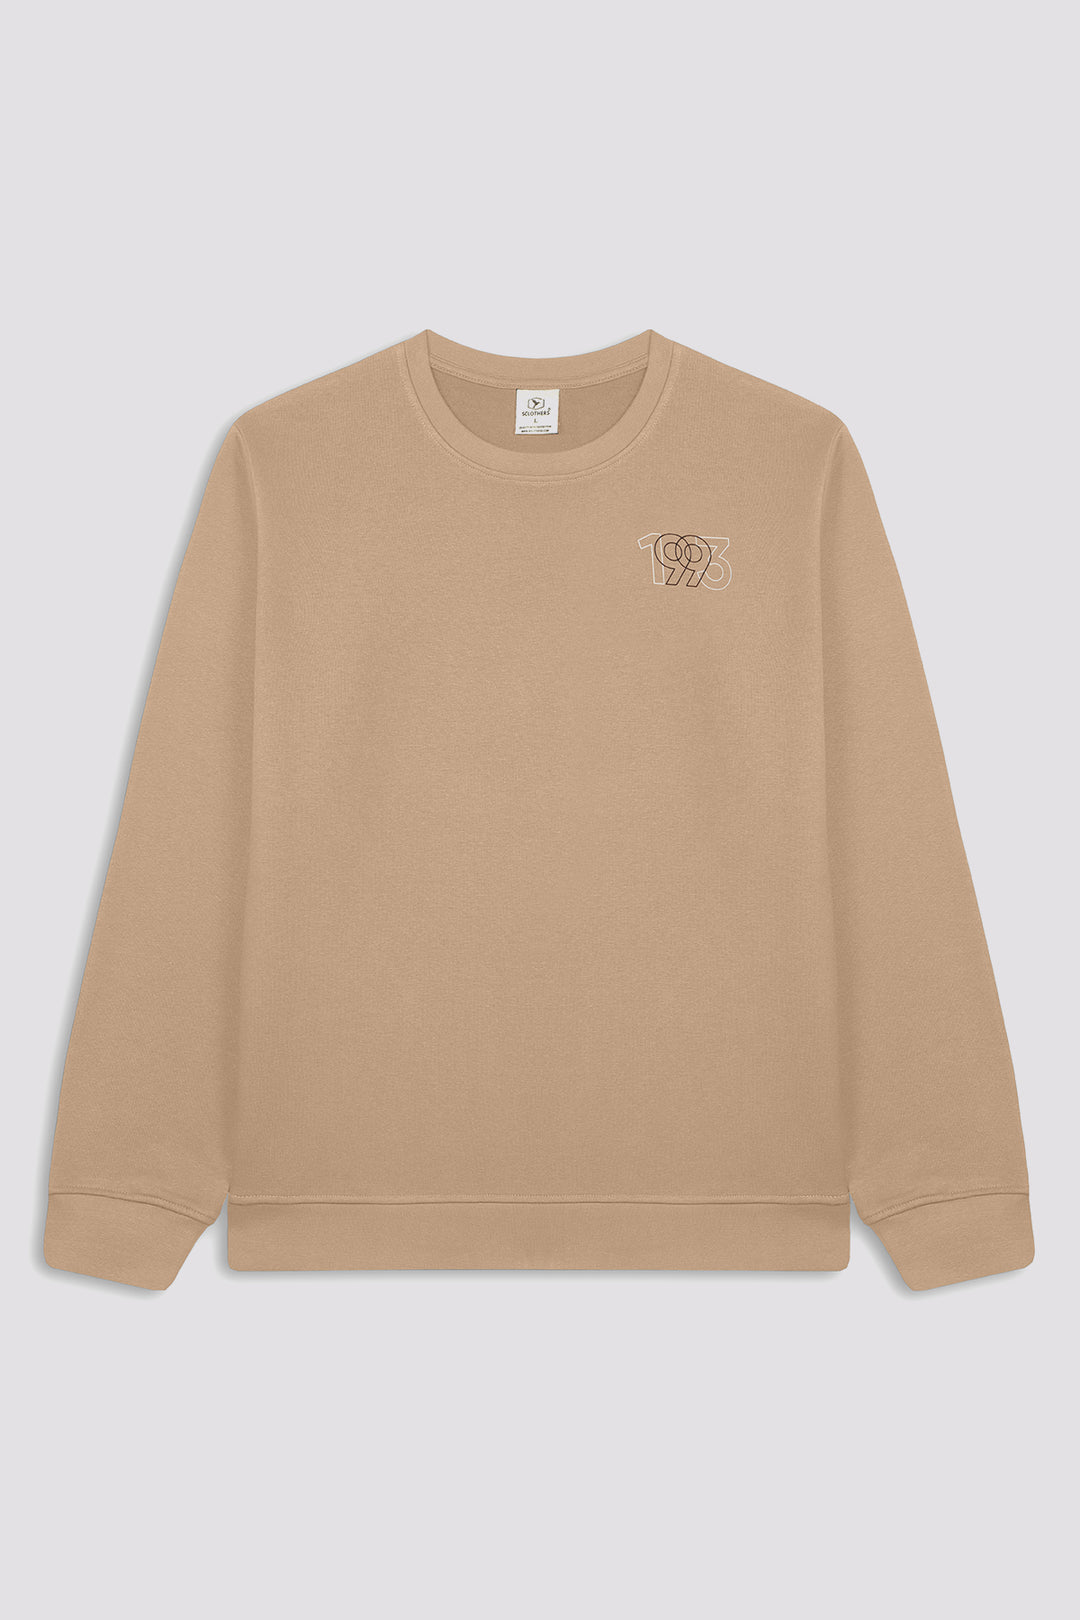 Taupe 1993 Back Printed Sweatshirt - W22 - MSW038R